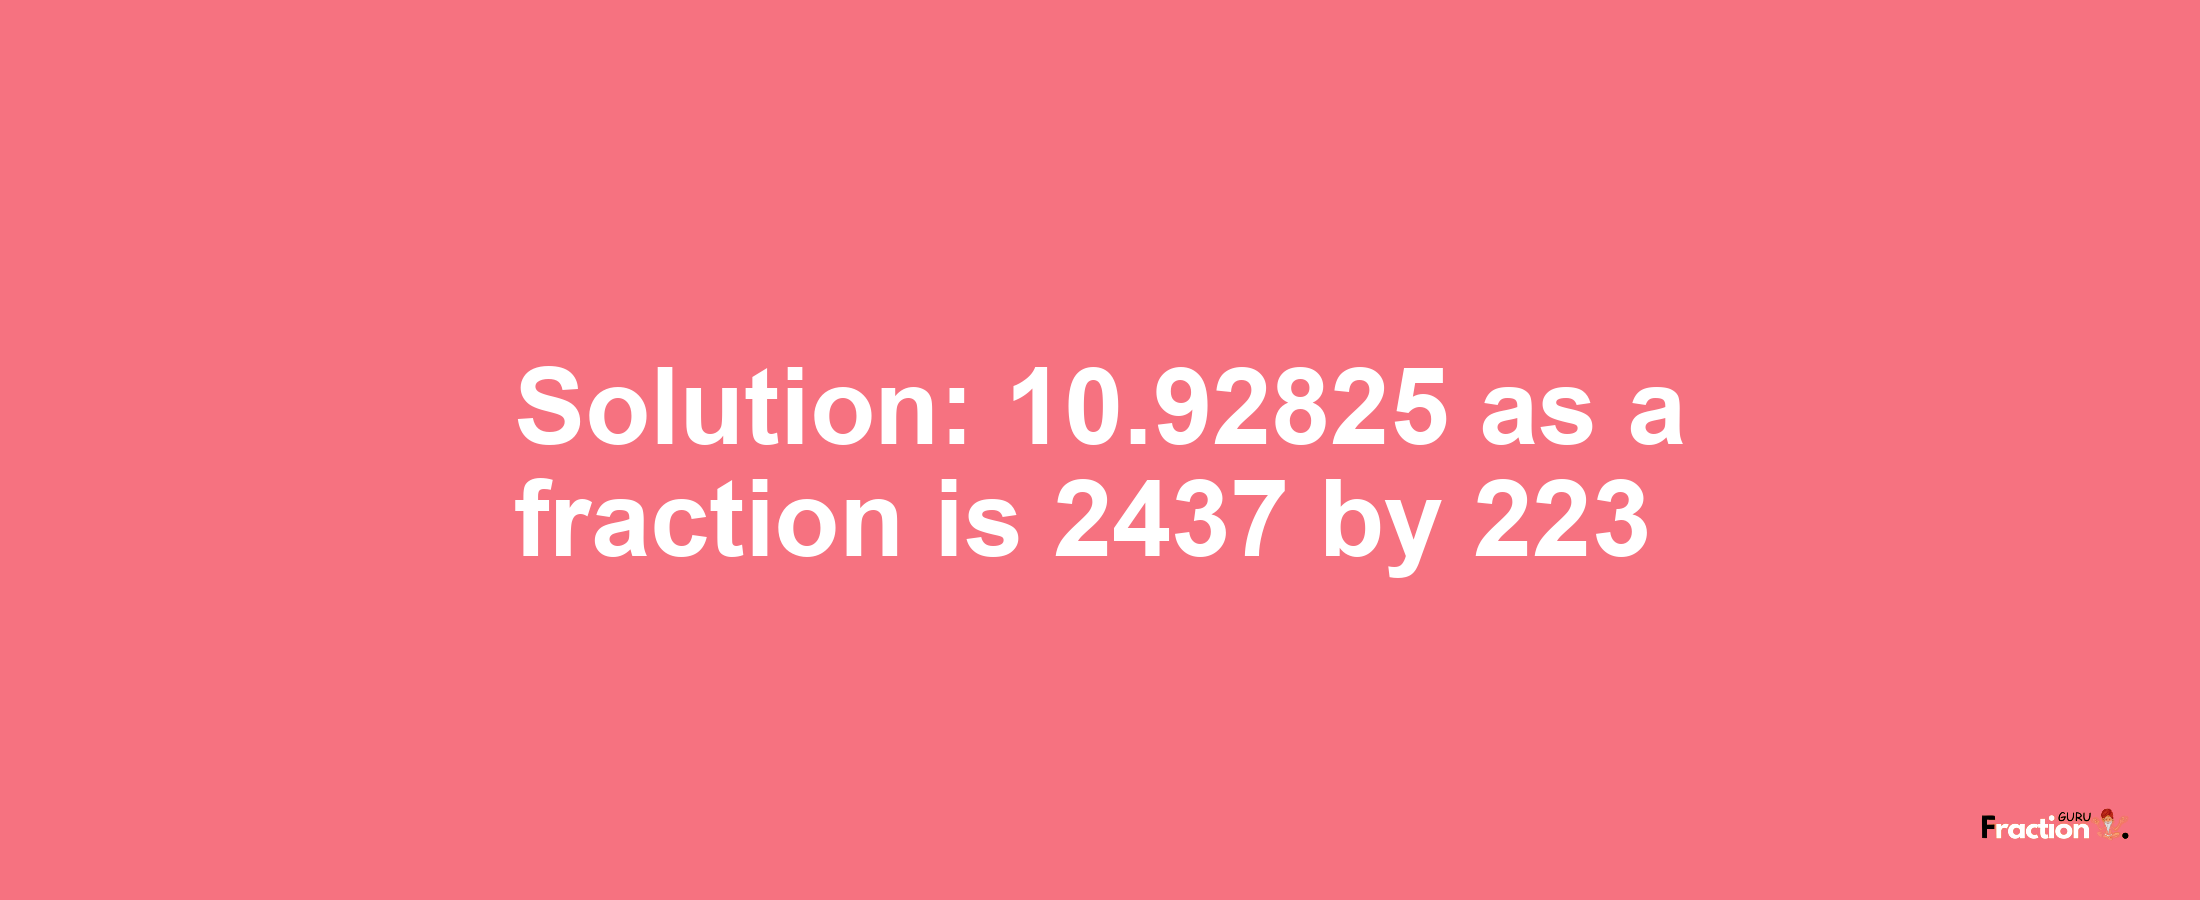 Solution:10.92825 as a fraction is 2437/223